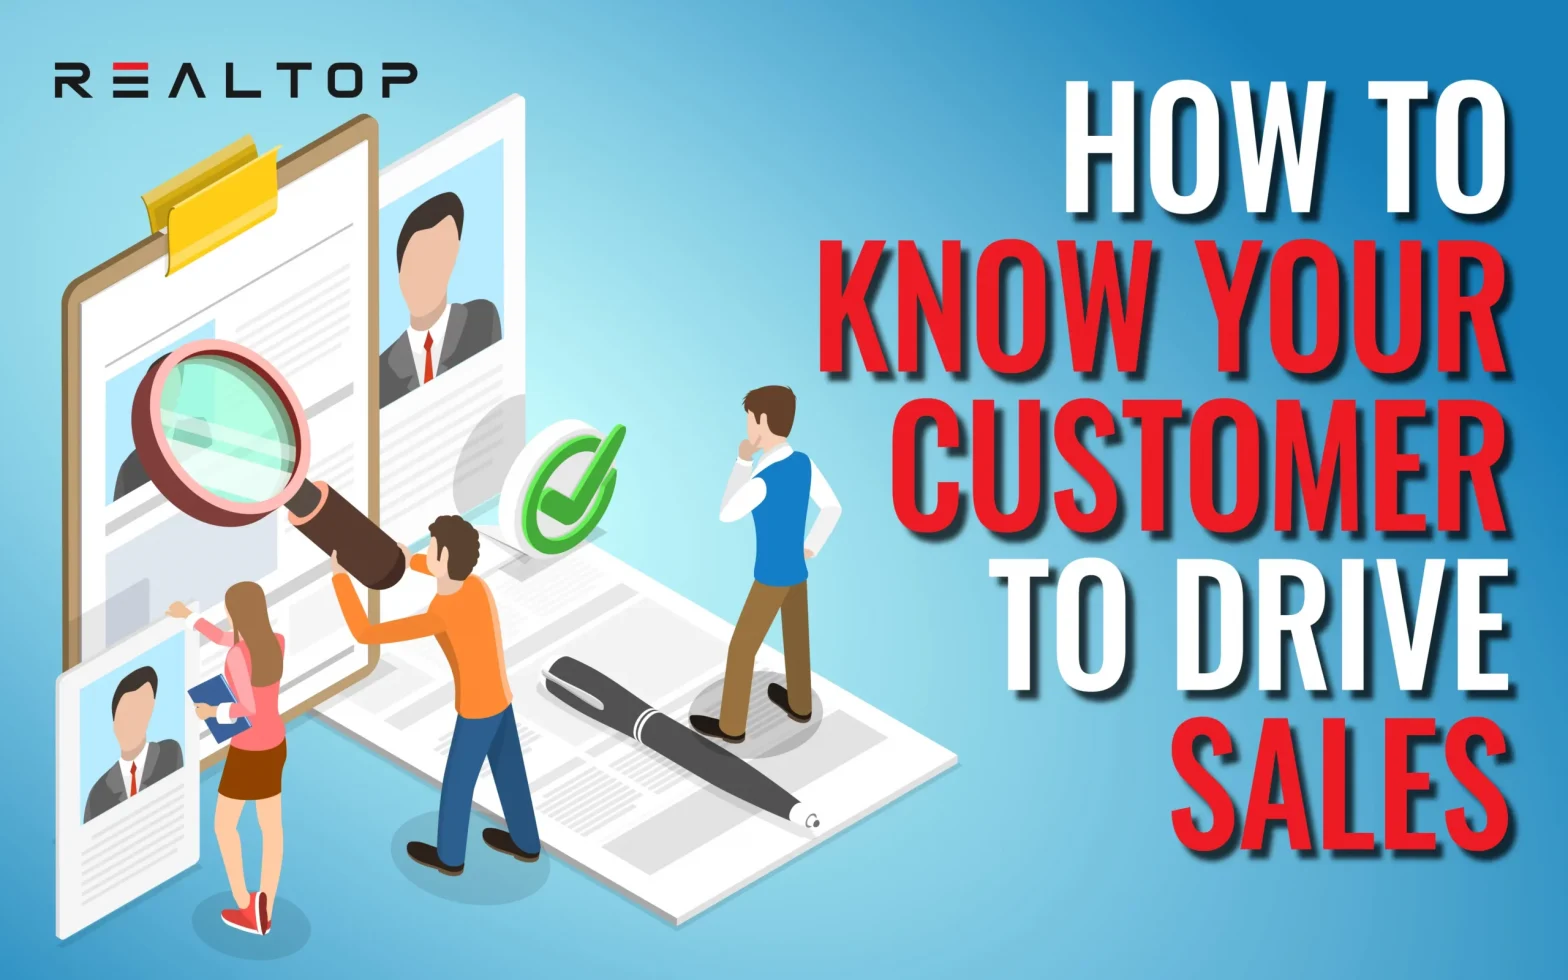 How to Know Your Customer